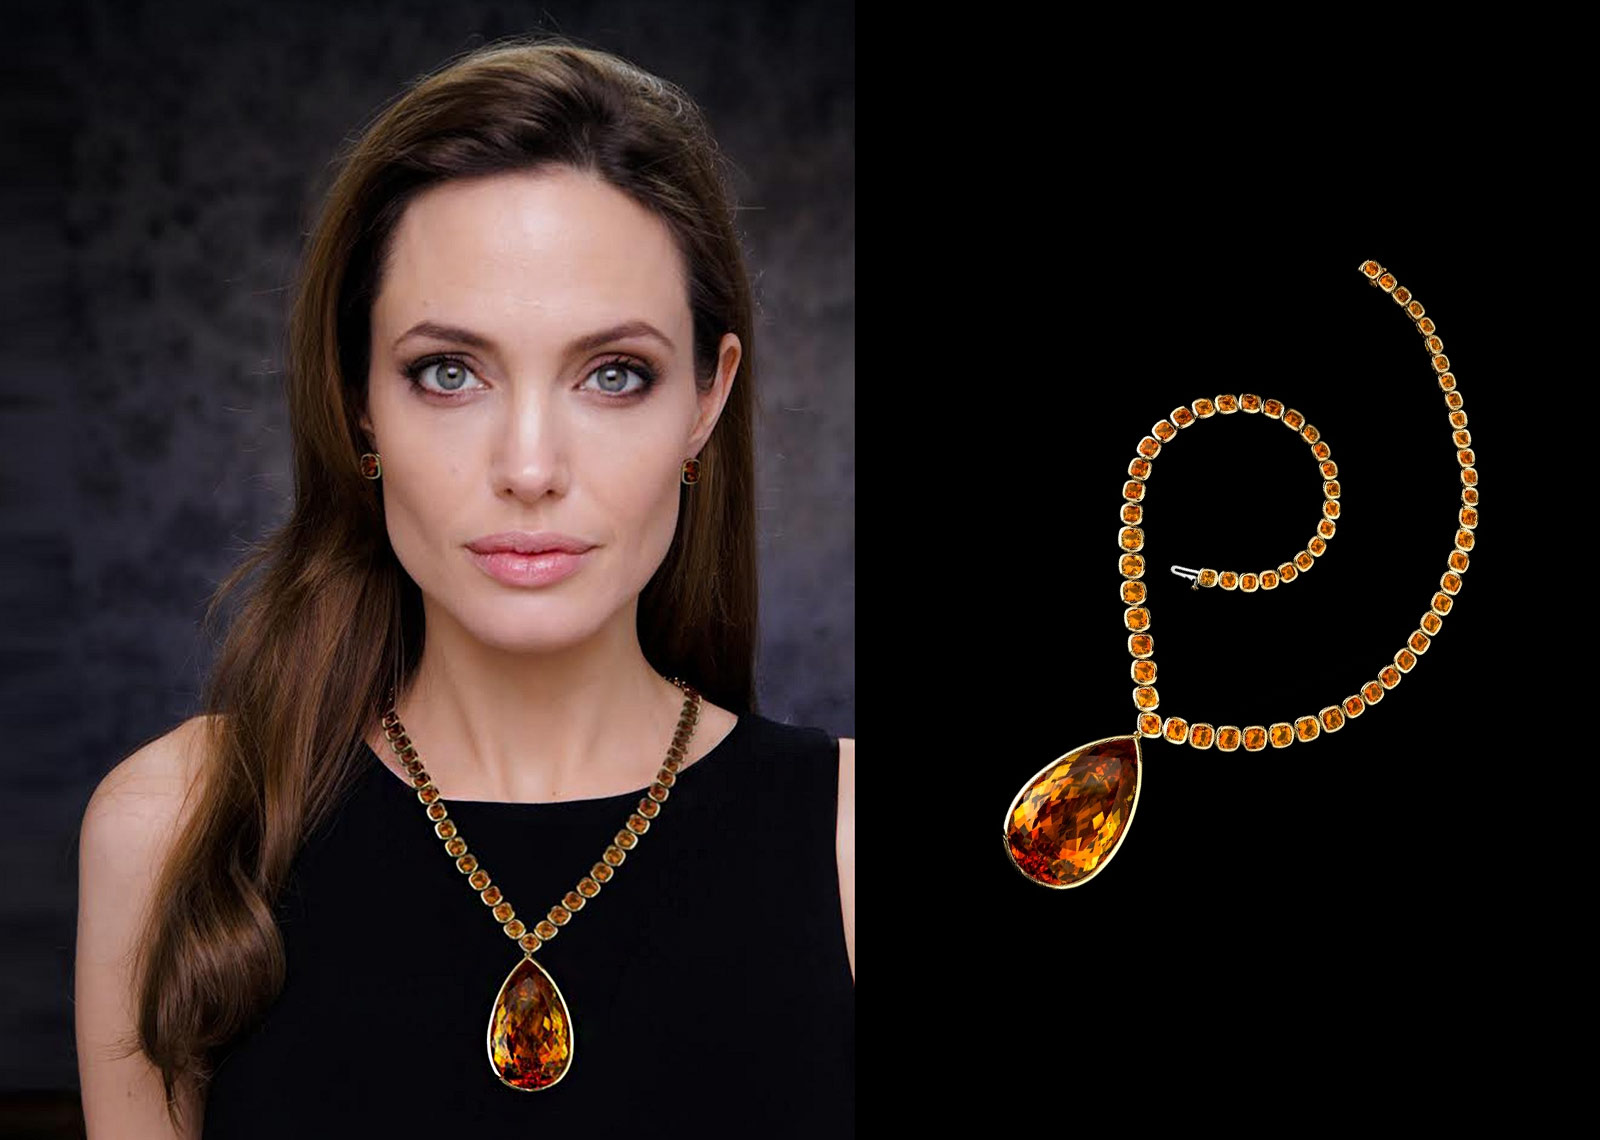 Robert Procop and Angelina Jolie collaboration necklace with 64 cushion cut citrines and a 177.11ct pear shaped citrine in yellow gold 